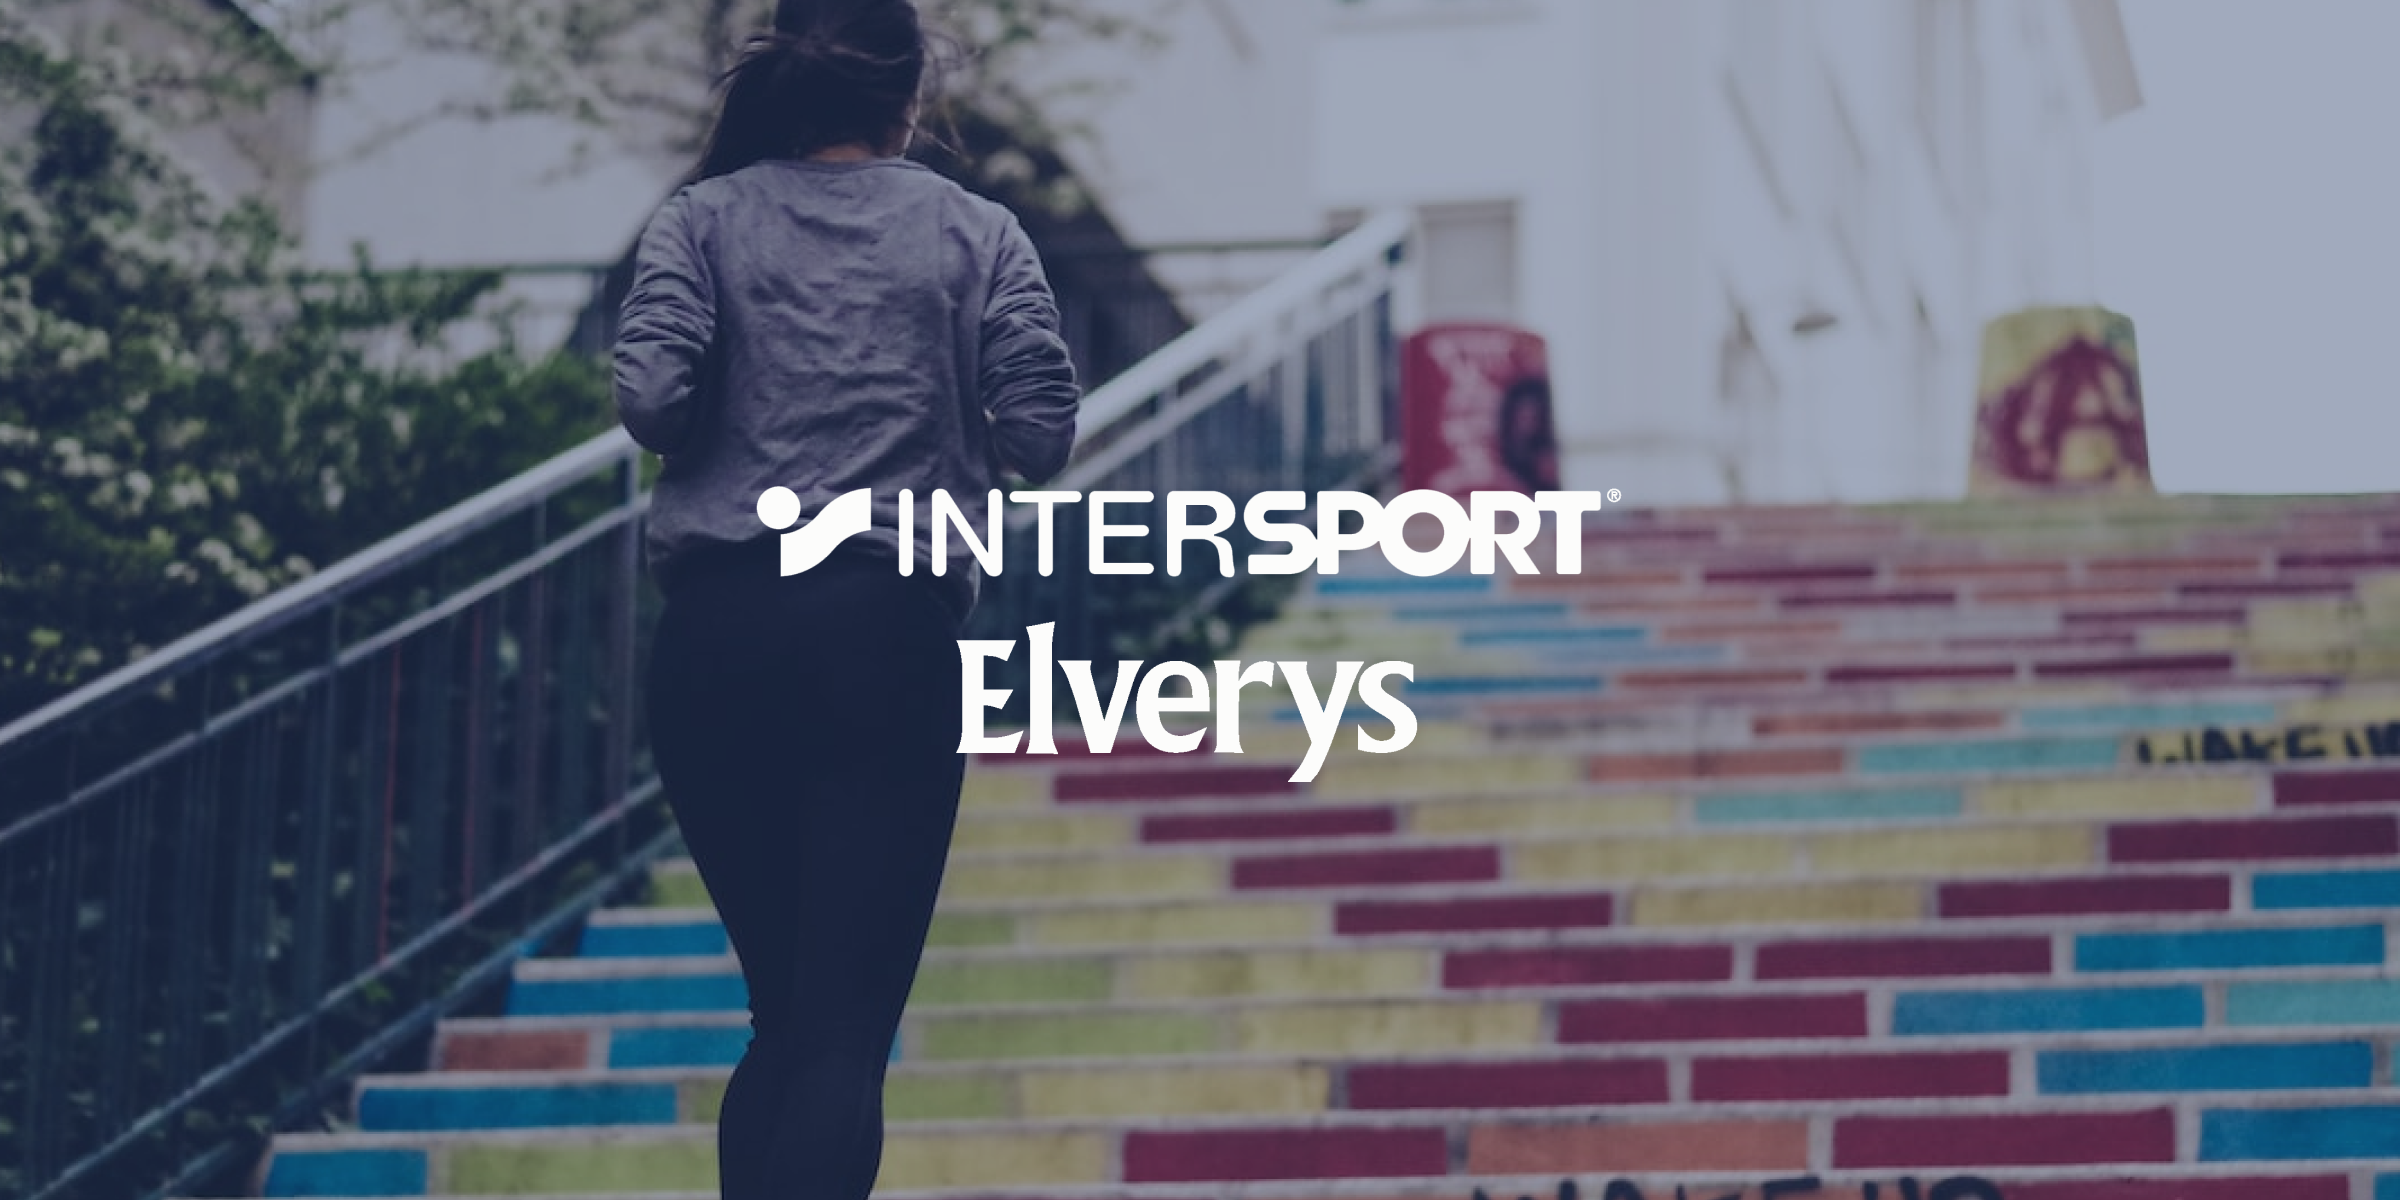 How Intersport Elverys solved a sell-through issue in-store